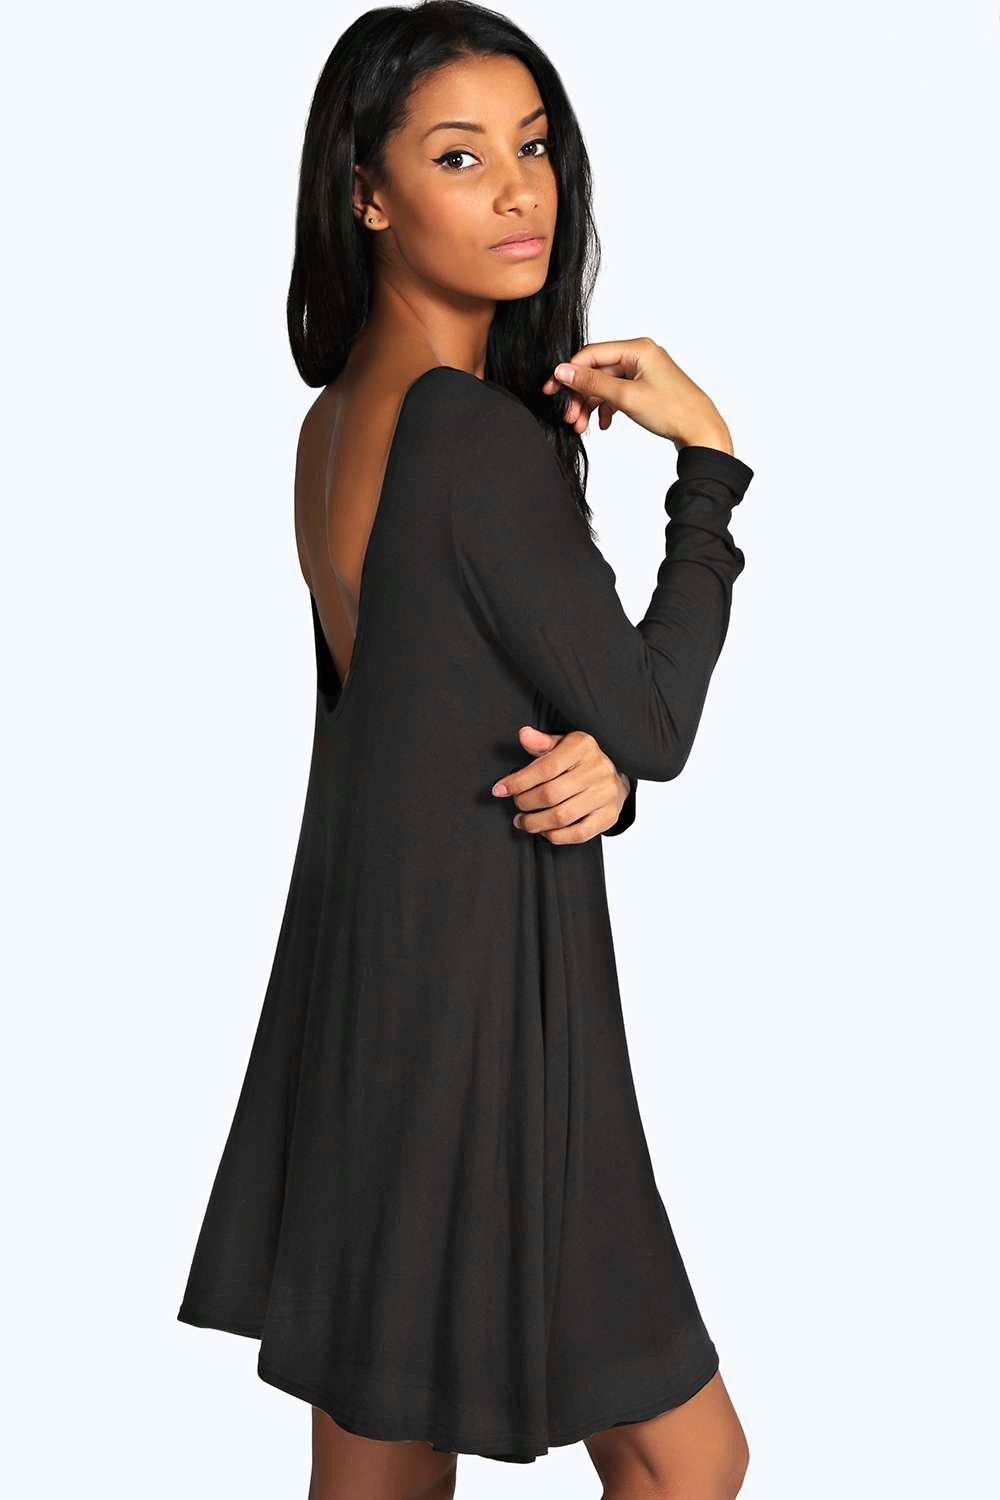 low back dress with sleeves